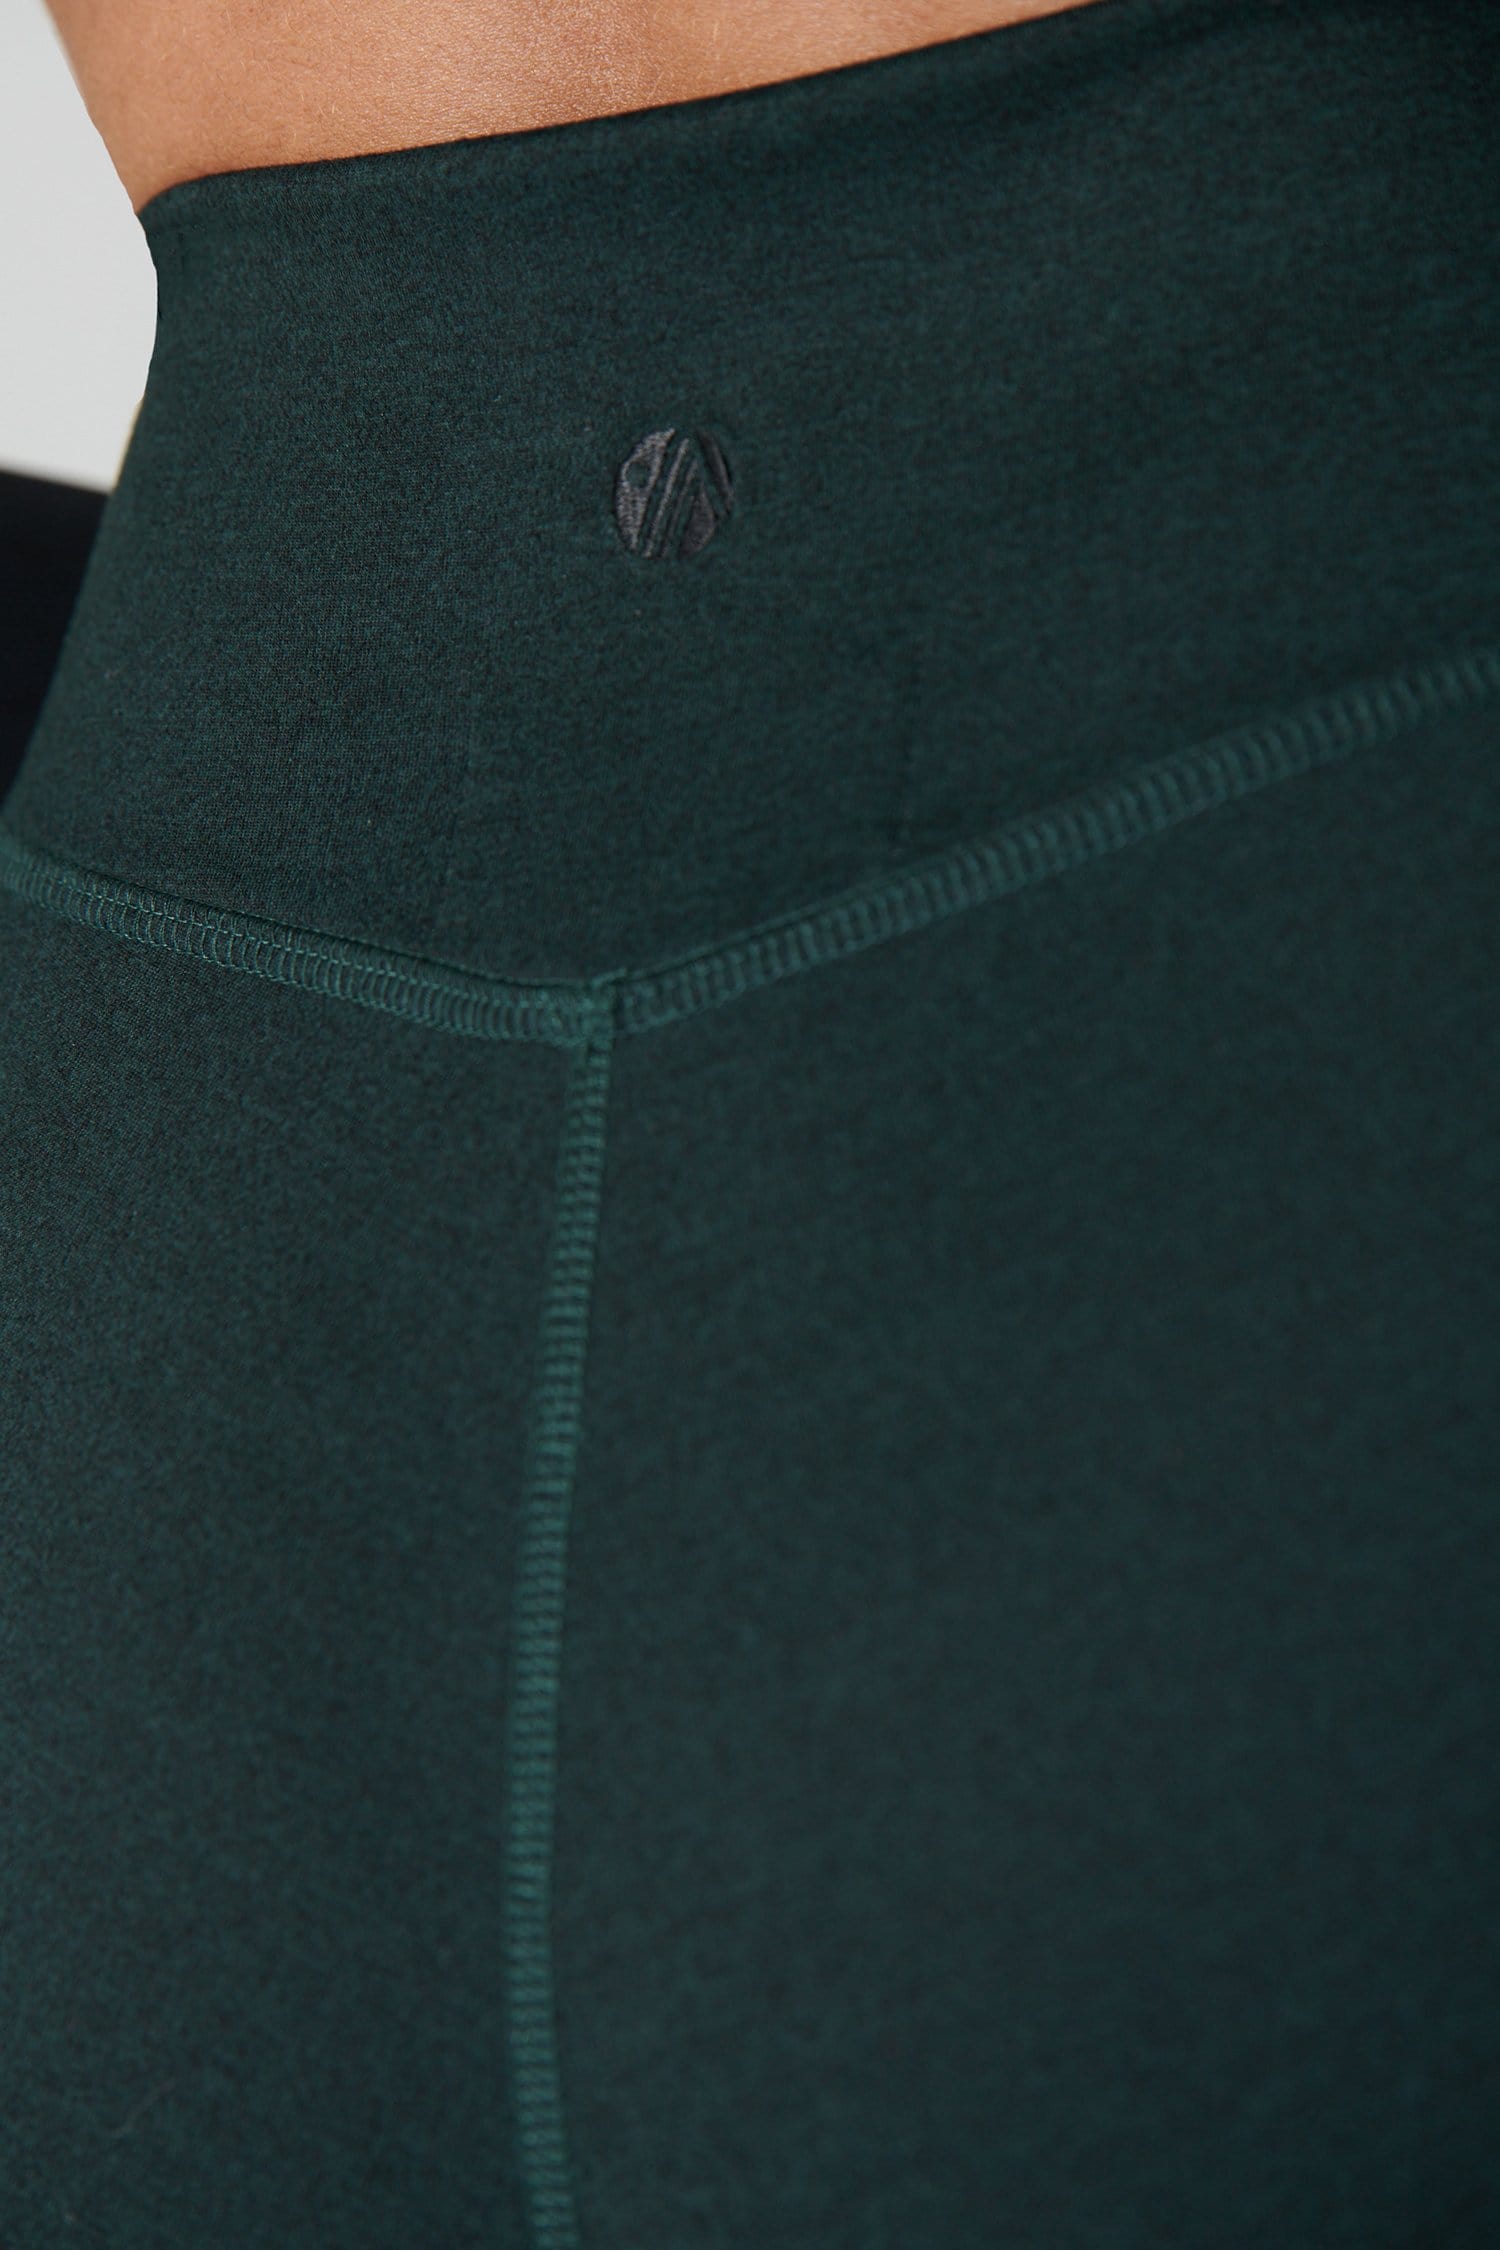 Thermal Outdoor Leggings - Forest Green